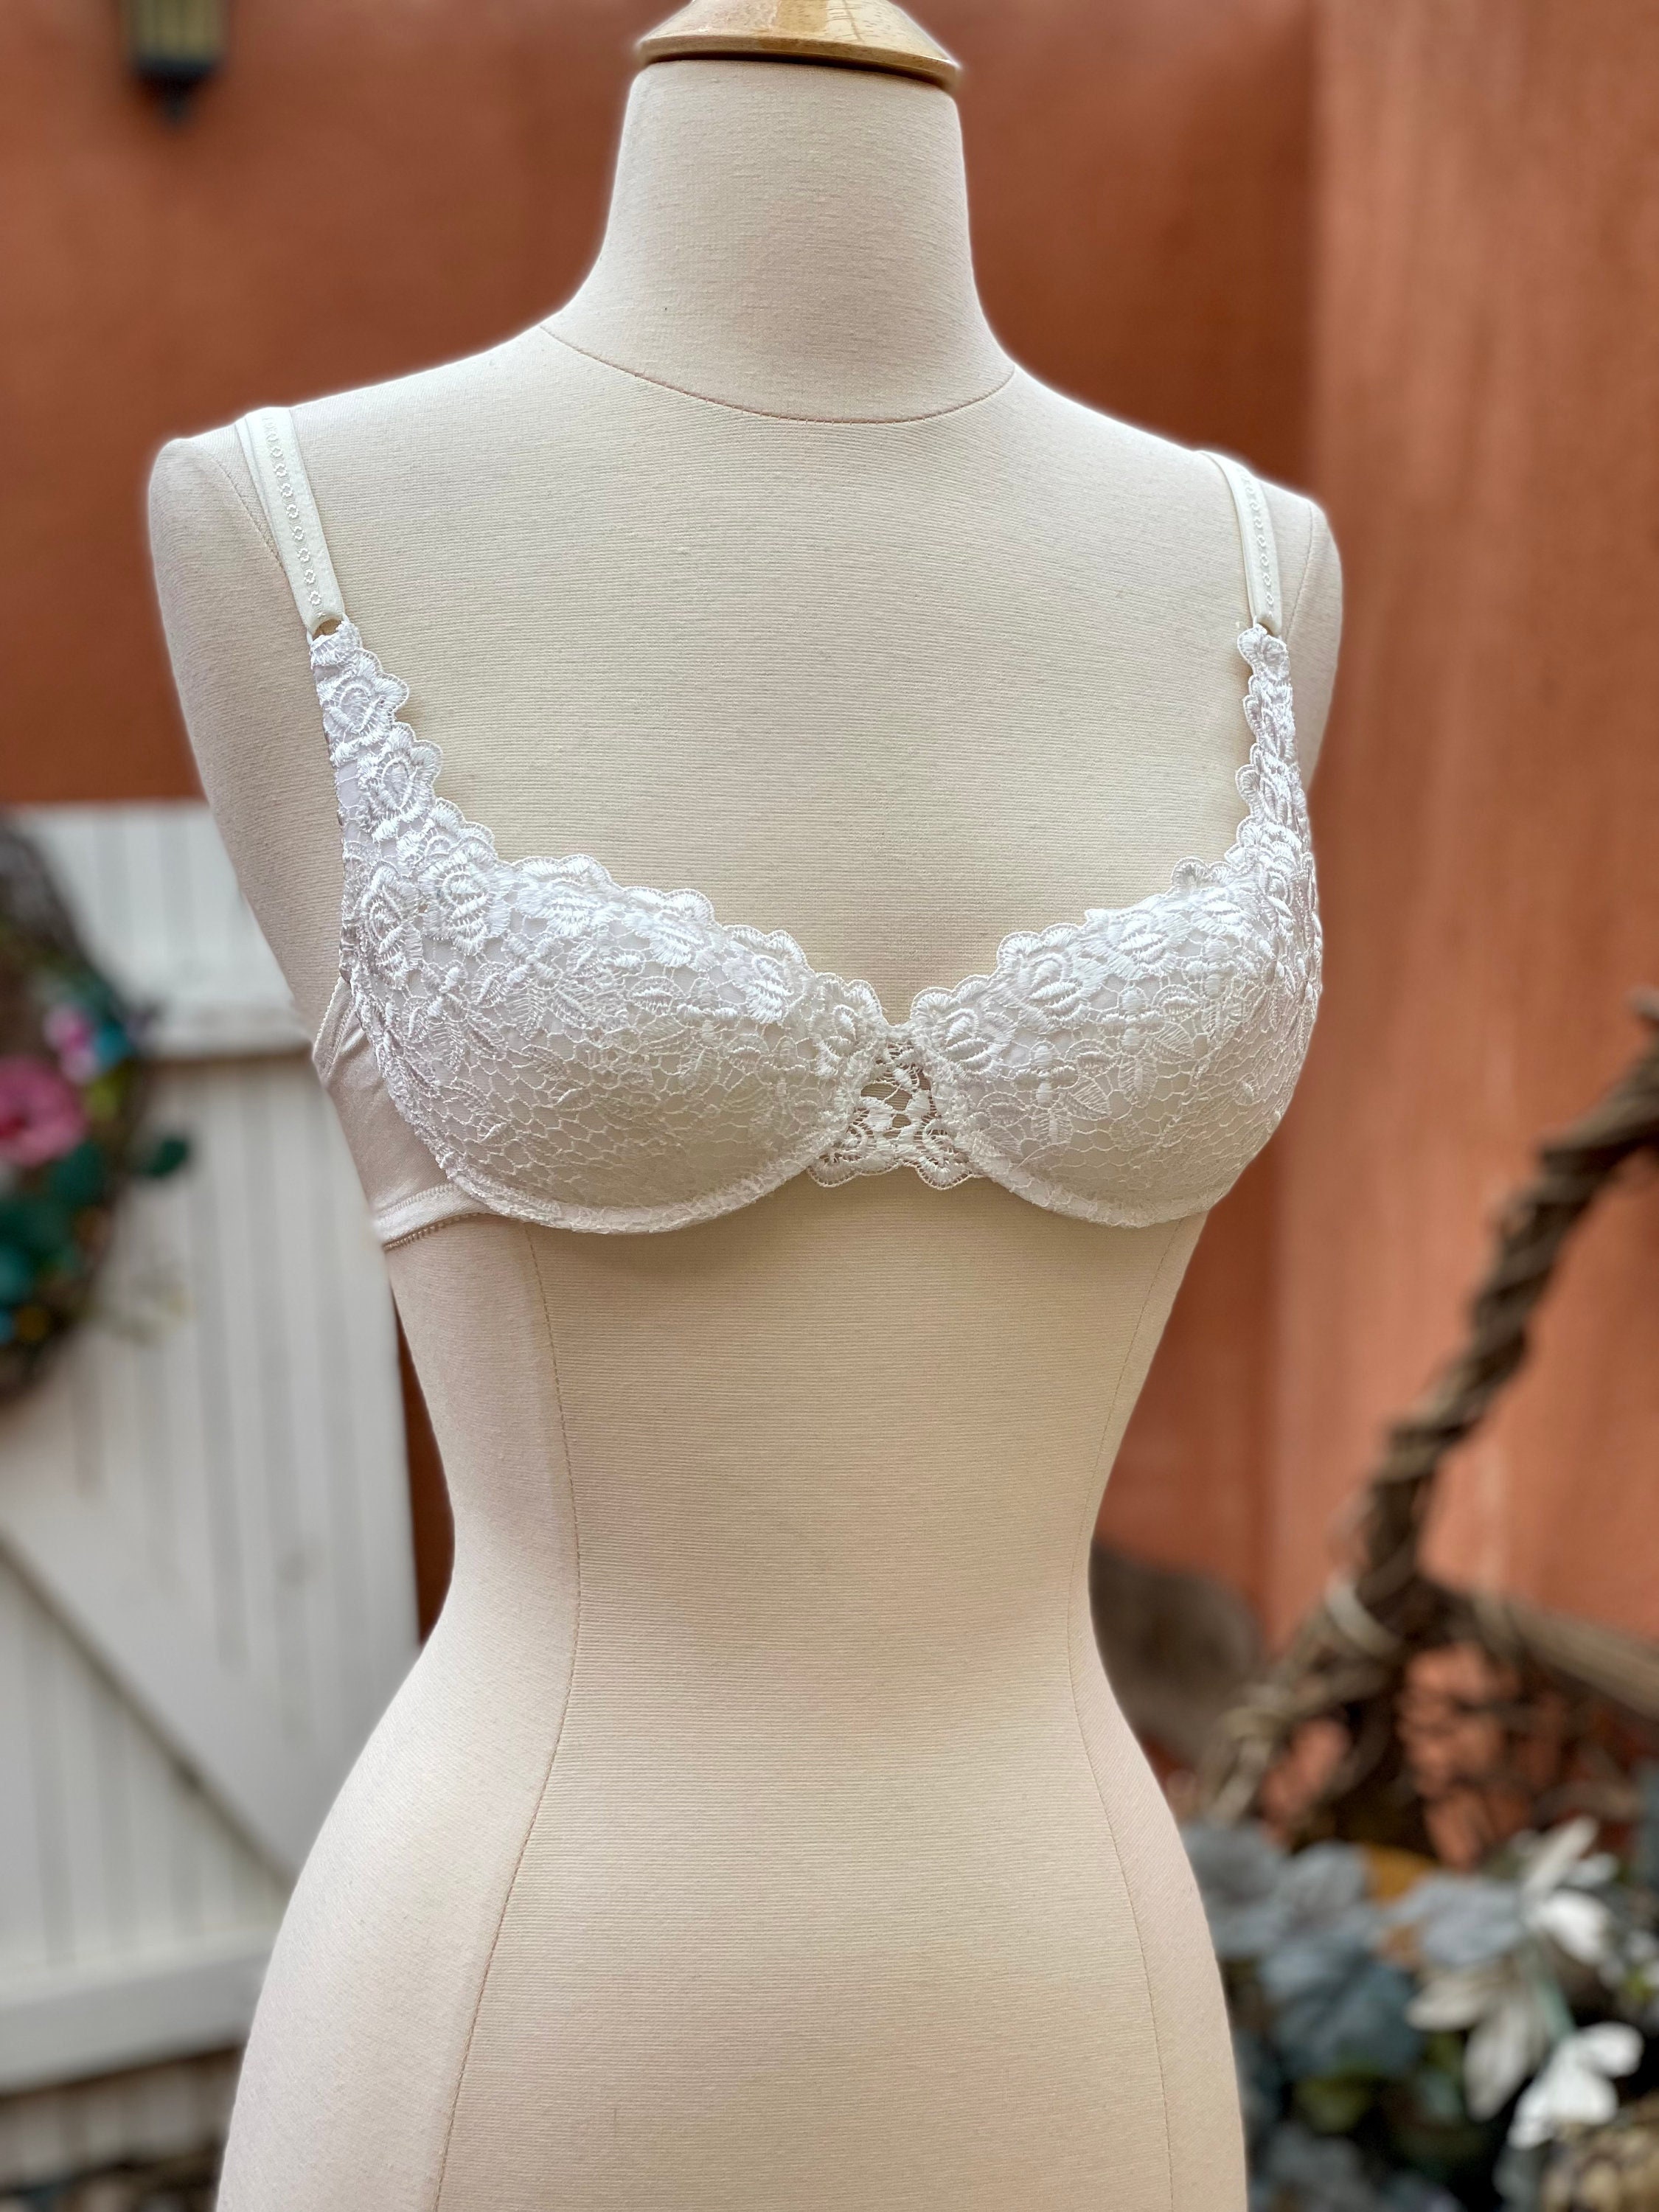 Vintage Victoria's Secret White Lace Miracle Bra NEW OLD STOCK Size 32A -   Canada